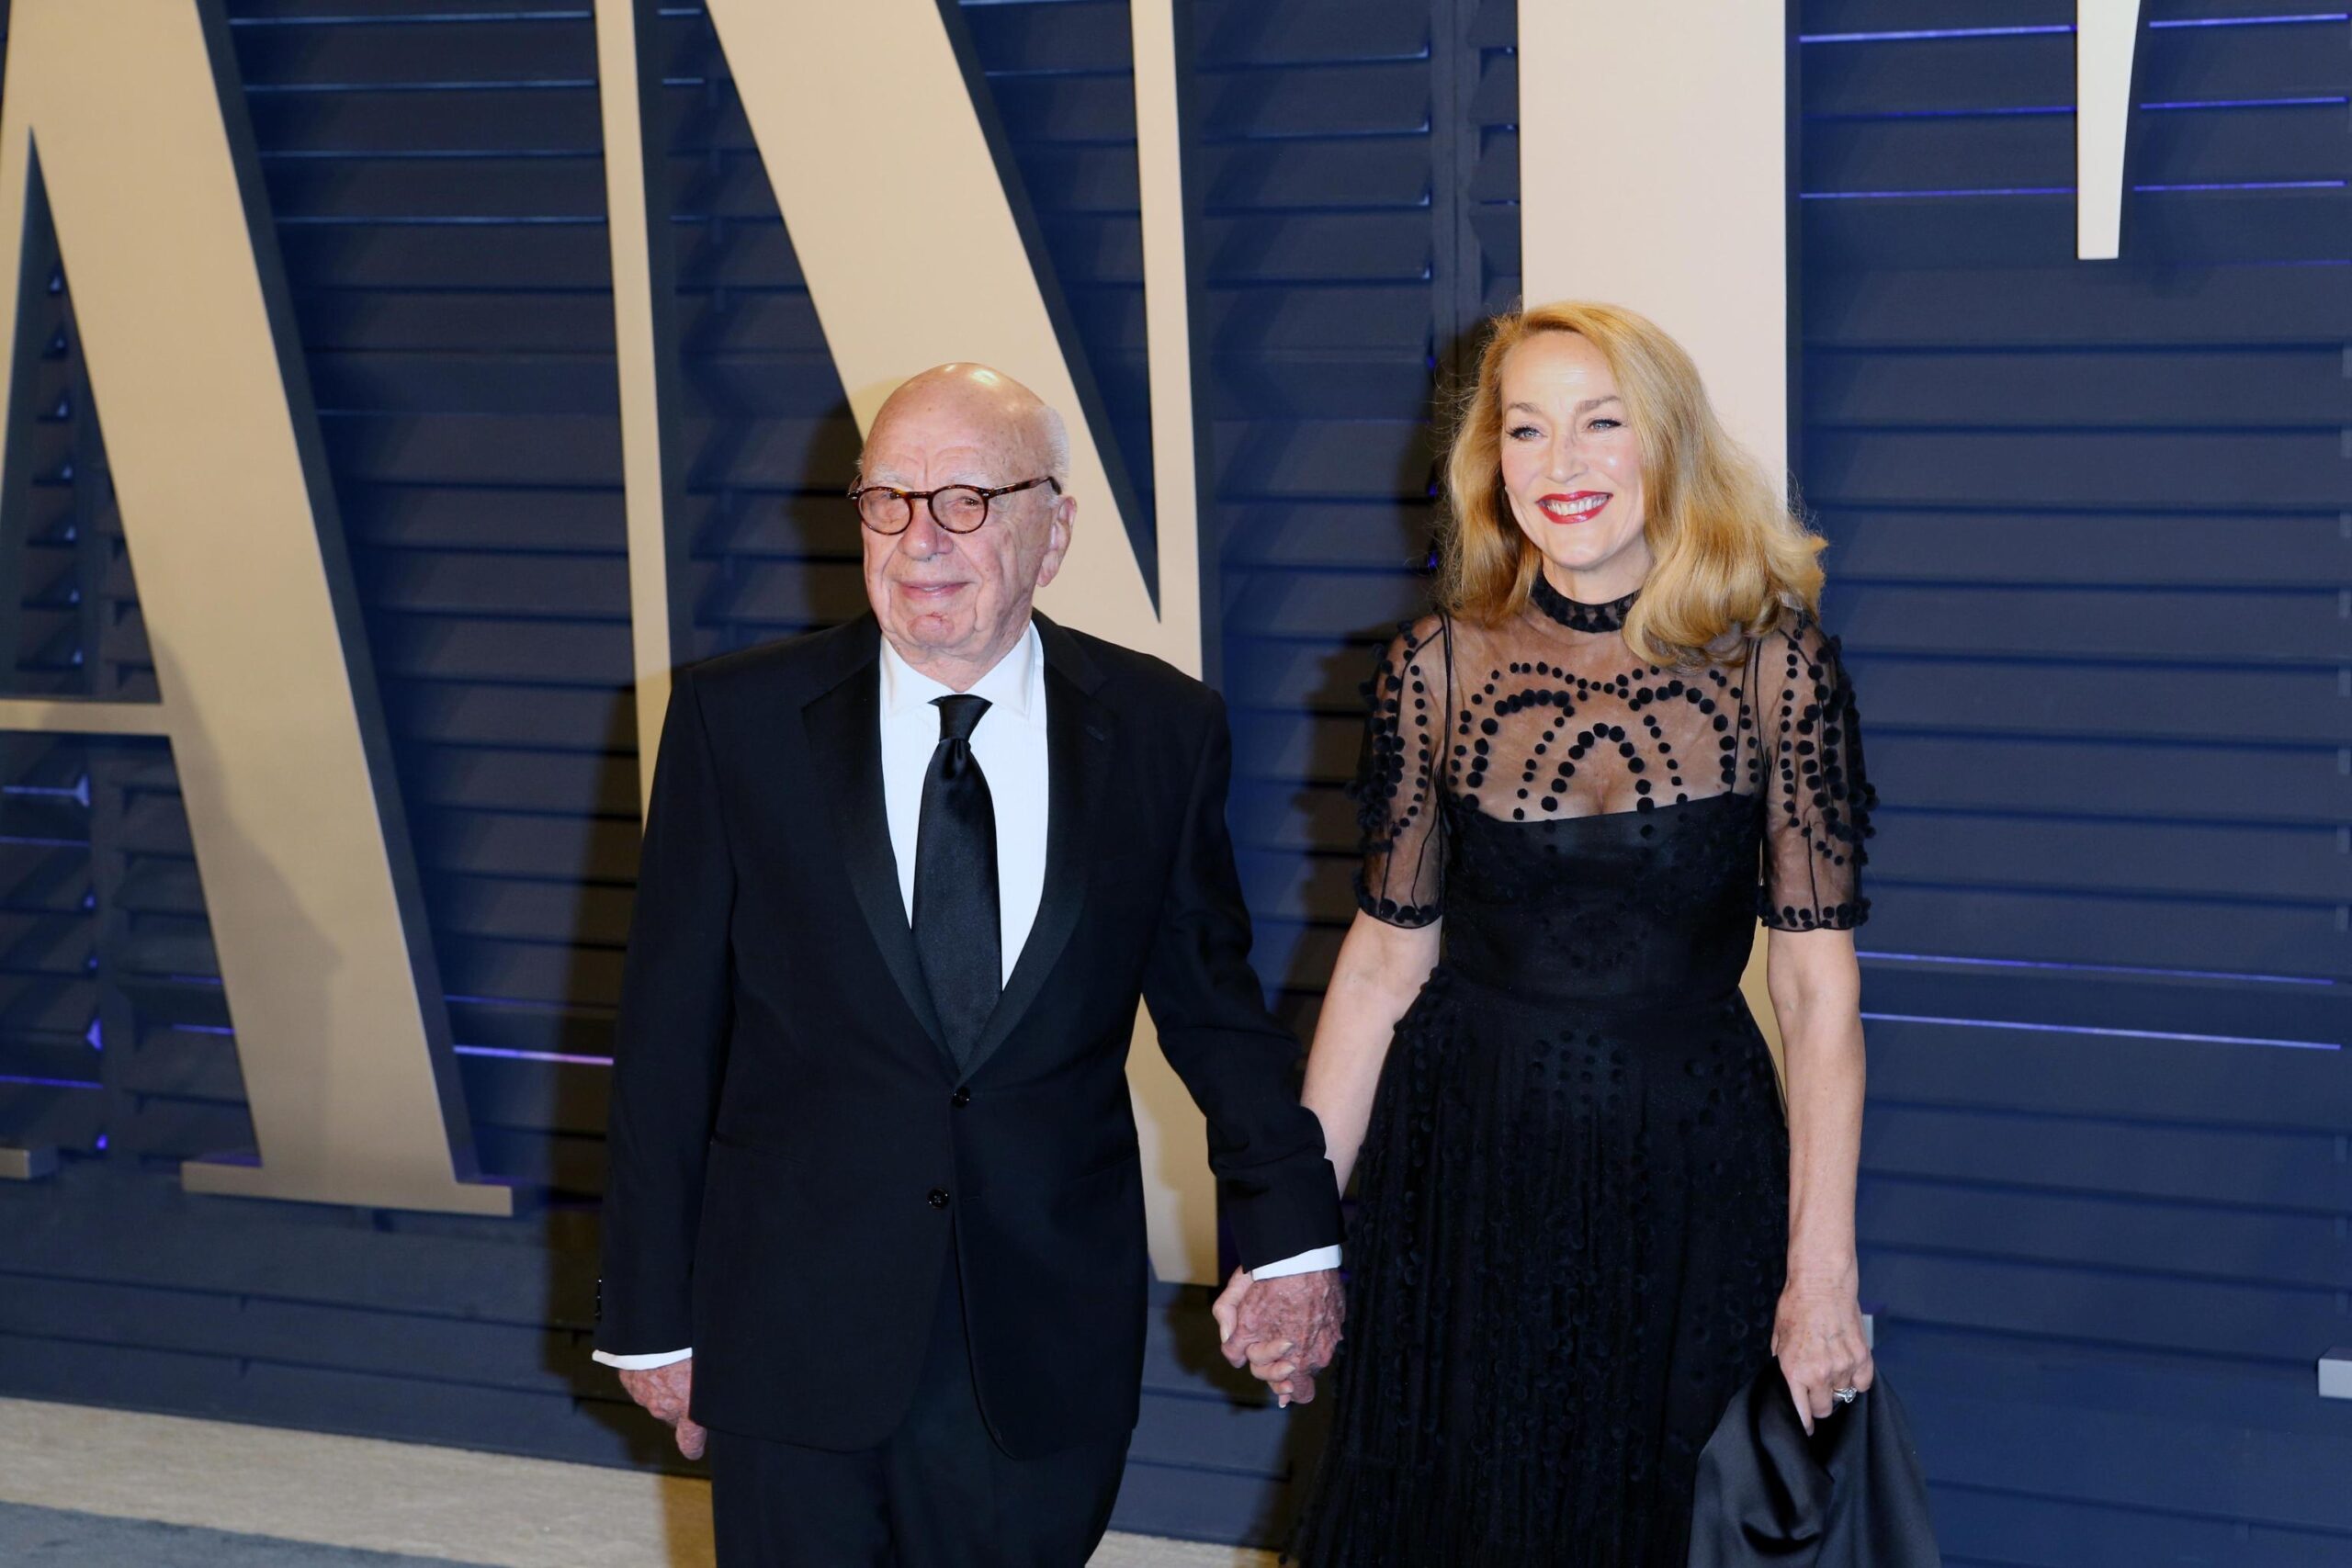 epa07395450 Rupert Murdoch (L) and Jerry Hall (R) poses at the 2019 Vanity Fair Oscar Party following the 91st annual Academy Awards ceremony, in Beverly Hills, California, USA, 24 February 2019. The Oscars are presented for outstanding individual or collective efforts in 24 categories in filmmaking. The Oscars are presented for outstanding individual or collective efforts in 24 categories in filmmaking.  EPA/NINA PROMMER